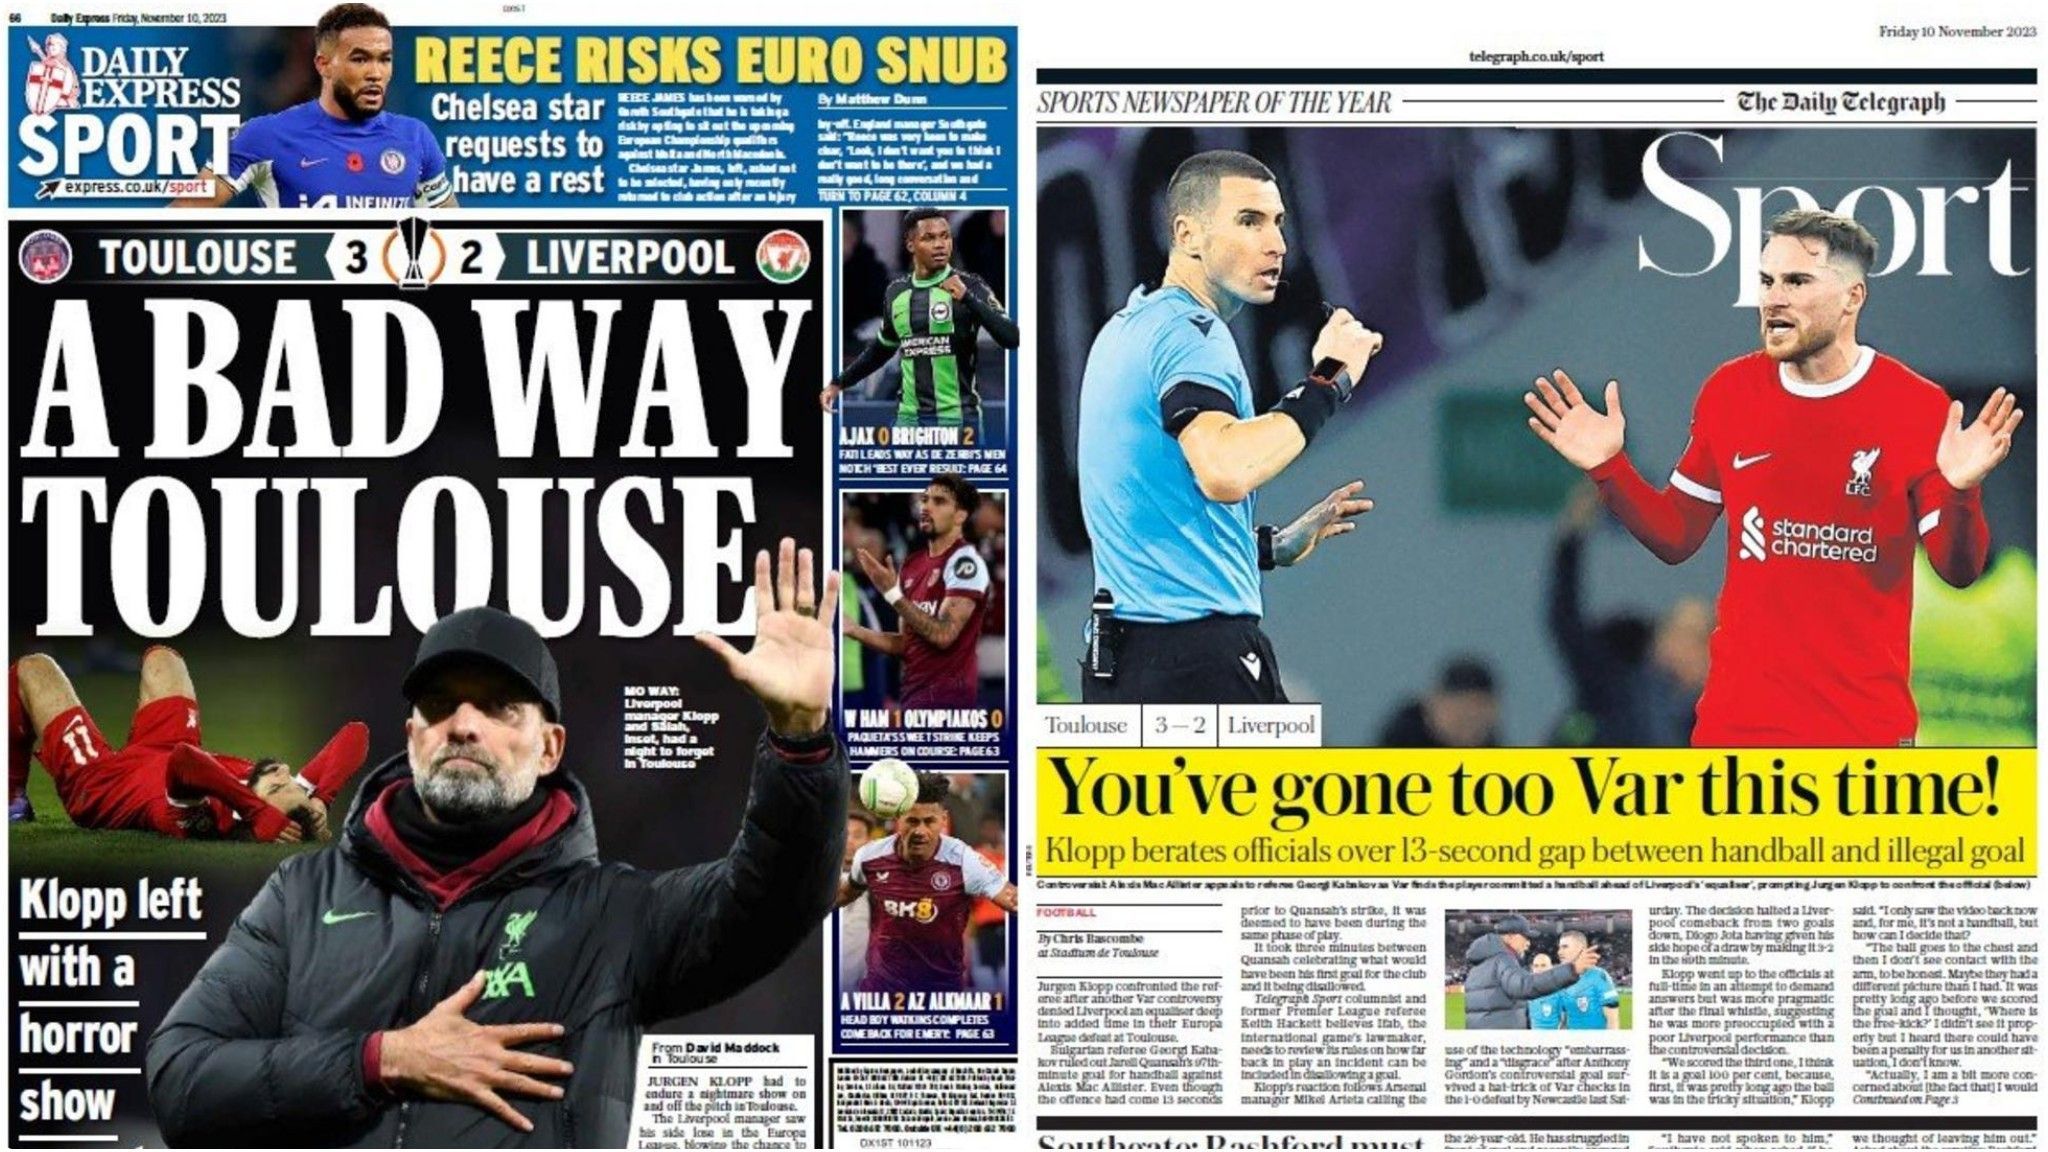 Punch Newspapers - UEFA Champions League: Liverpool FC vs